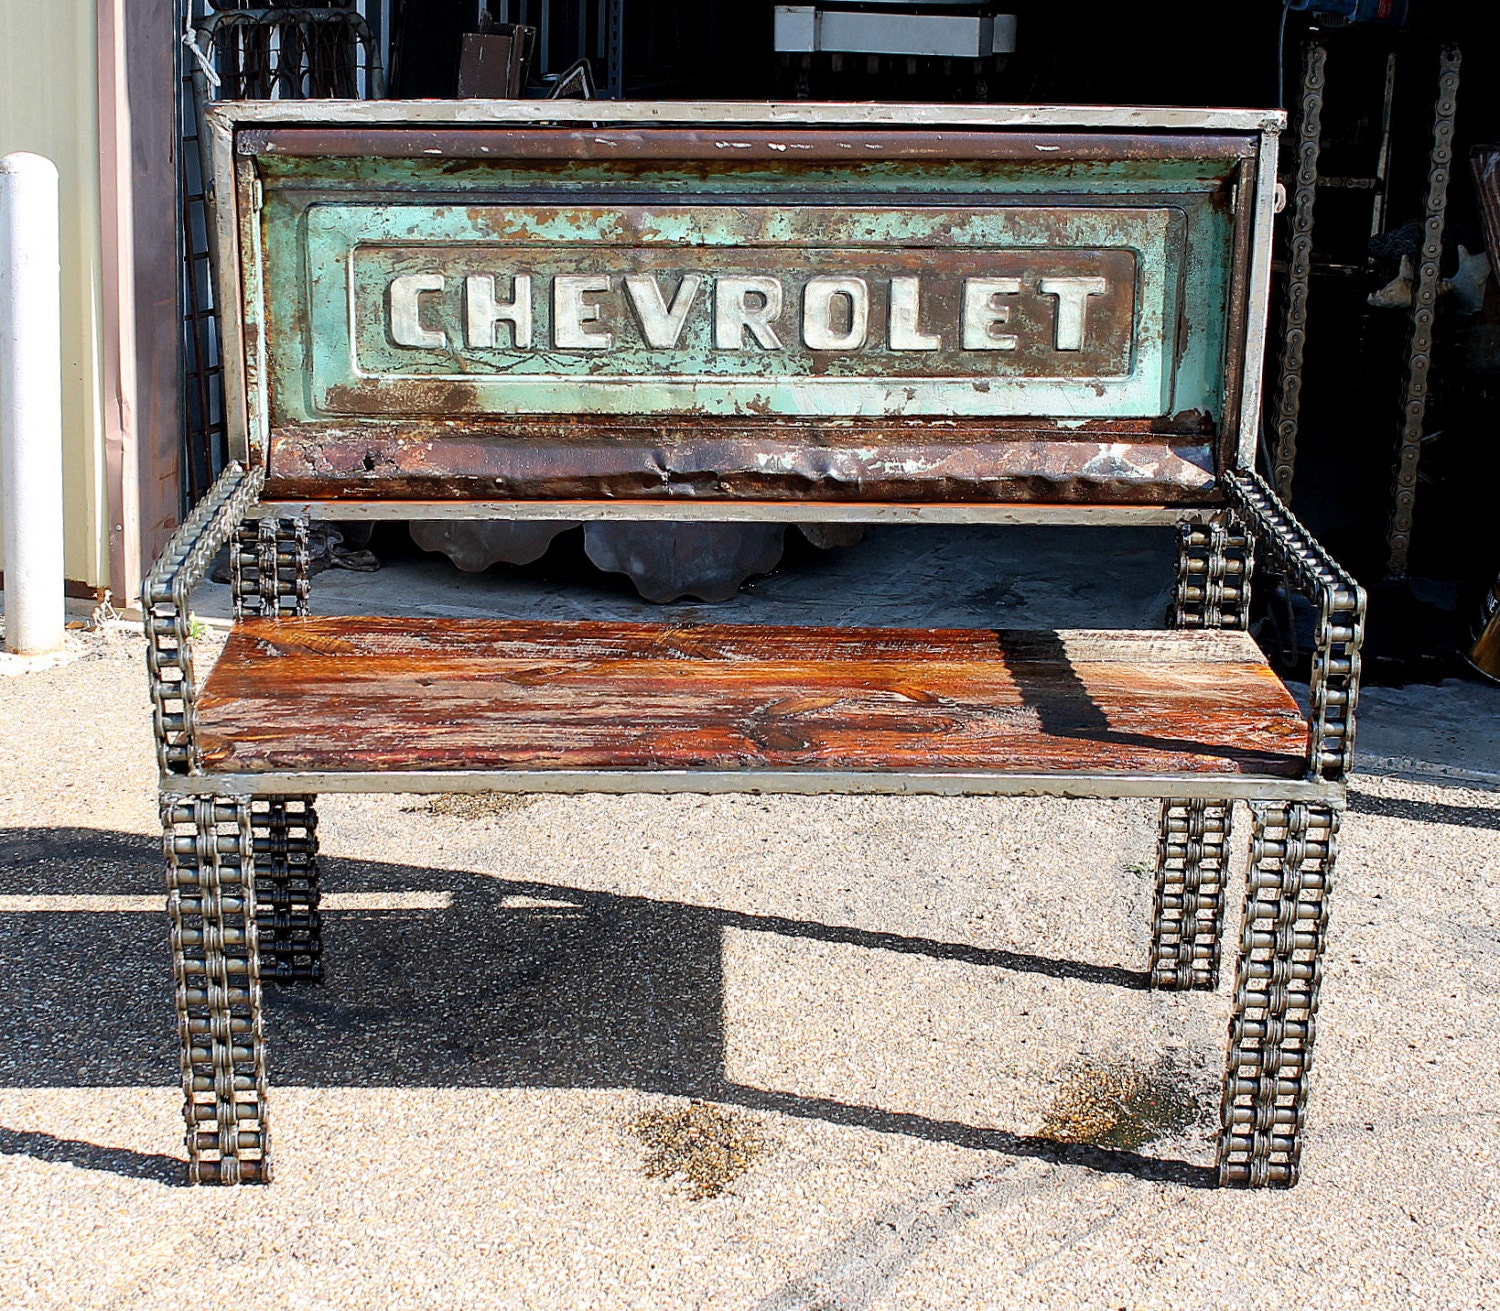 Reclaimed Wood Furniture Etsy